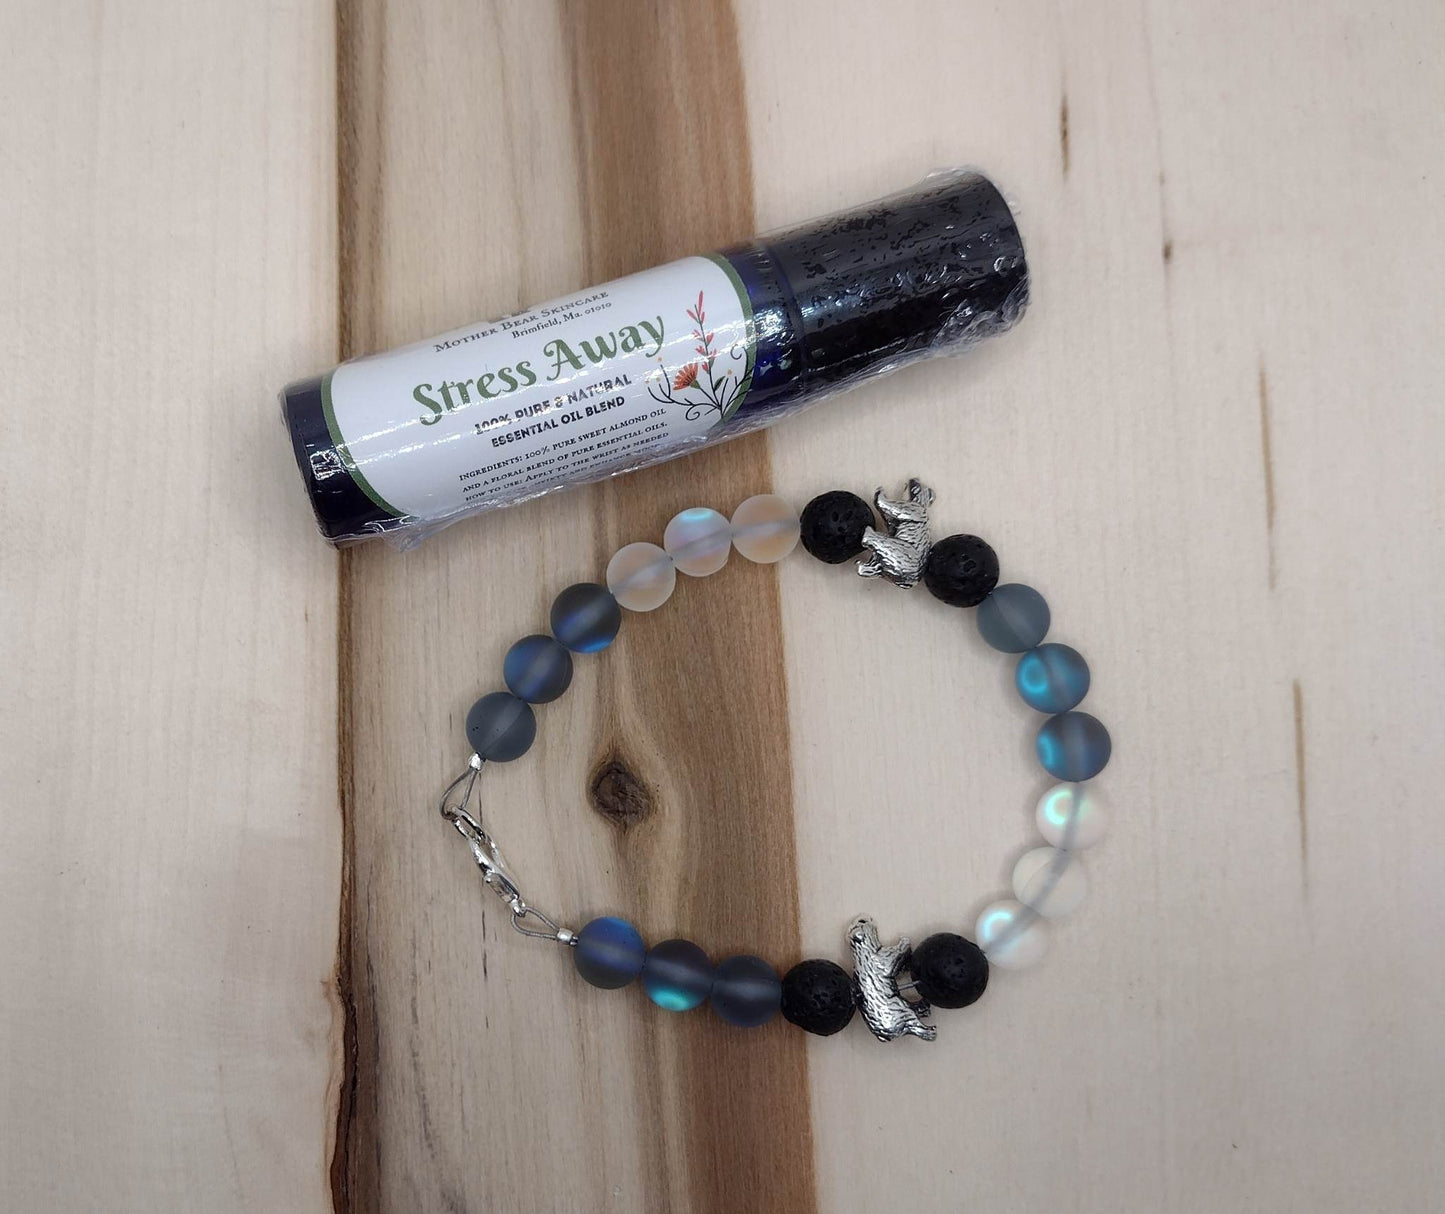 Handmade"Mama Bear"Lava Stone Diffuser Bracelet with "Stress Away" Roll-On Bottle (Pure Essential Oils).